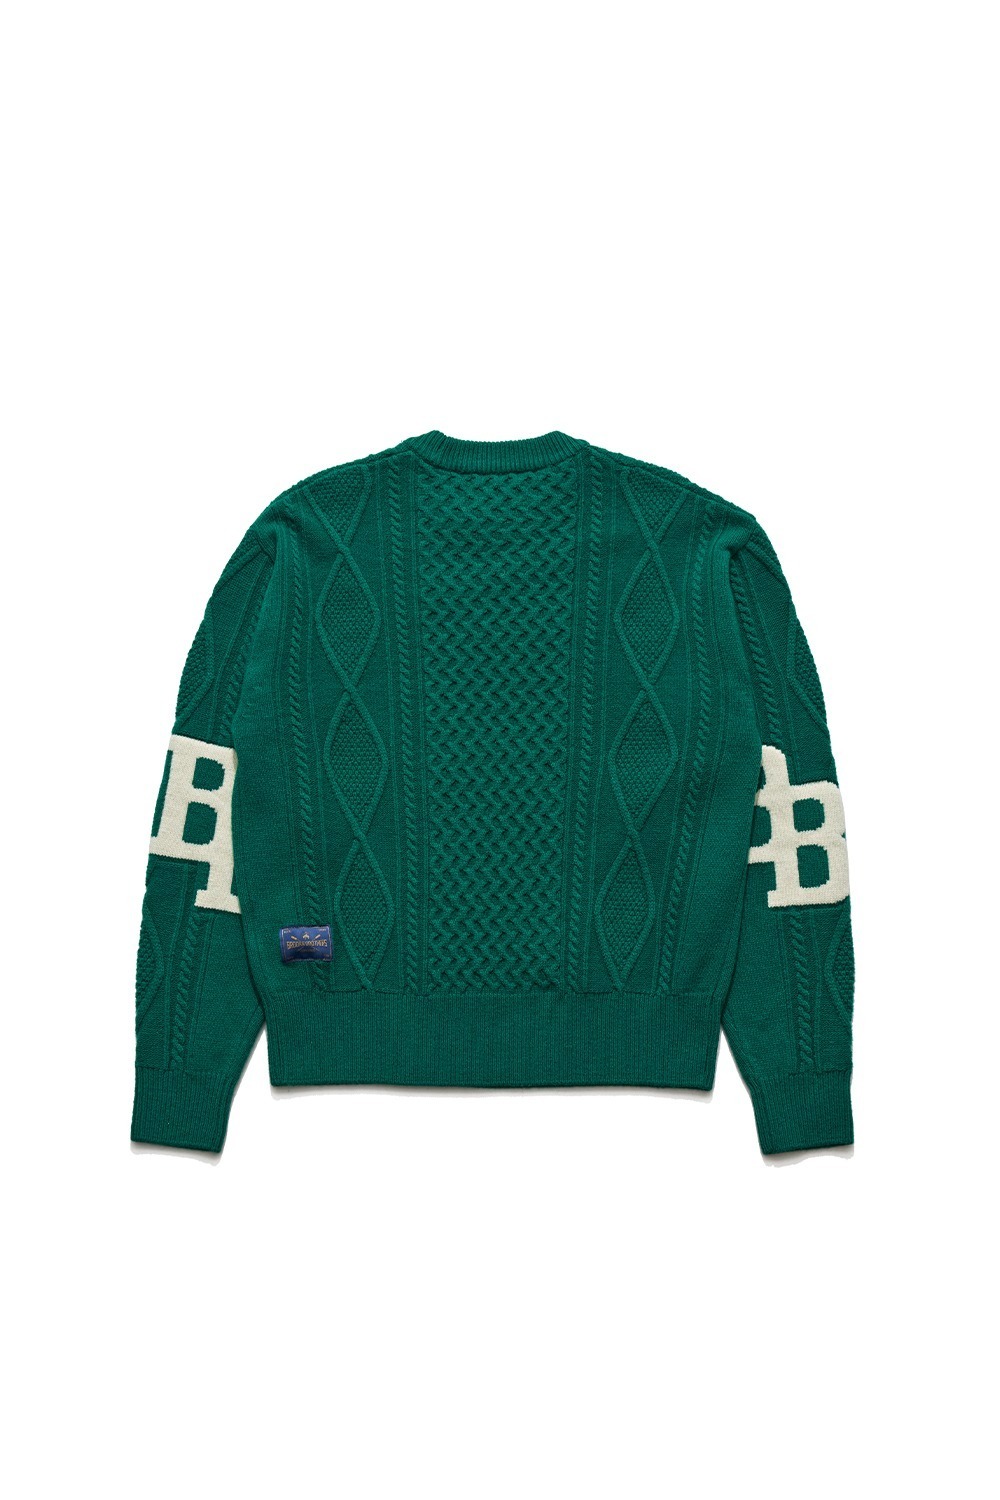 [EASTLOGUE X BROOKS BROTHERS] B.B CABLE KNIT SWEATER / GREEN